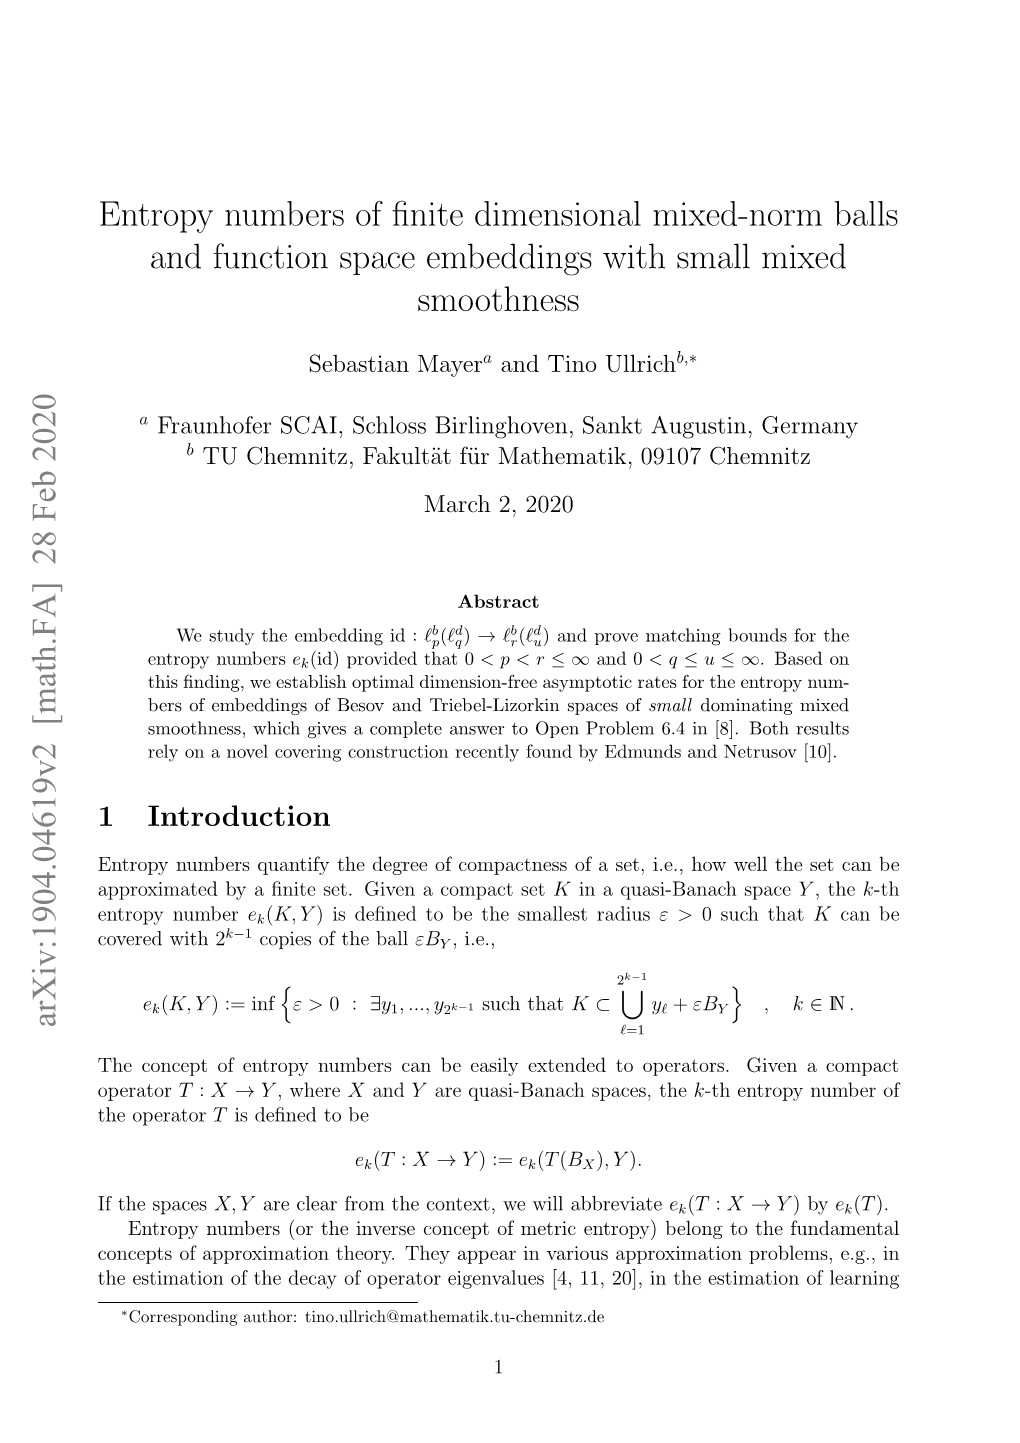 Entropy Numbers of Finite Dimensional Mixed-Norm Balls and Function